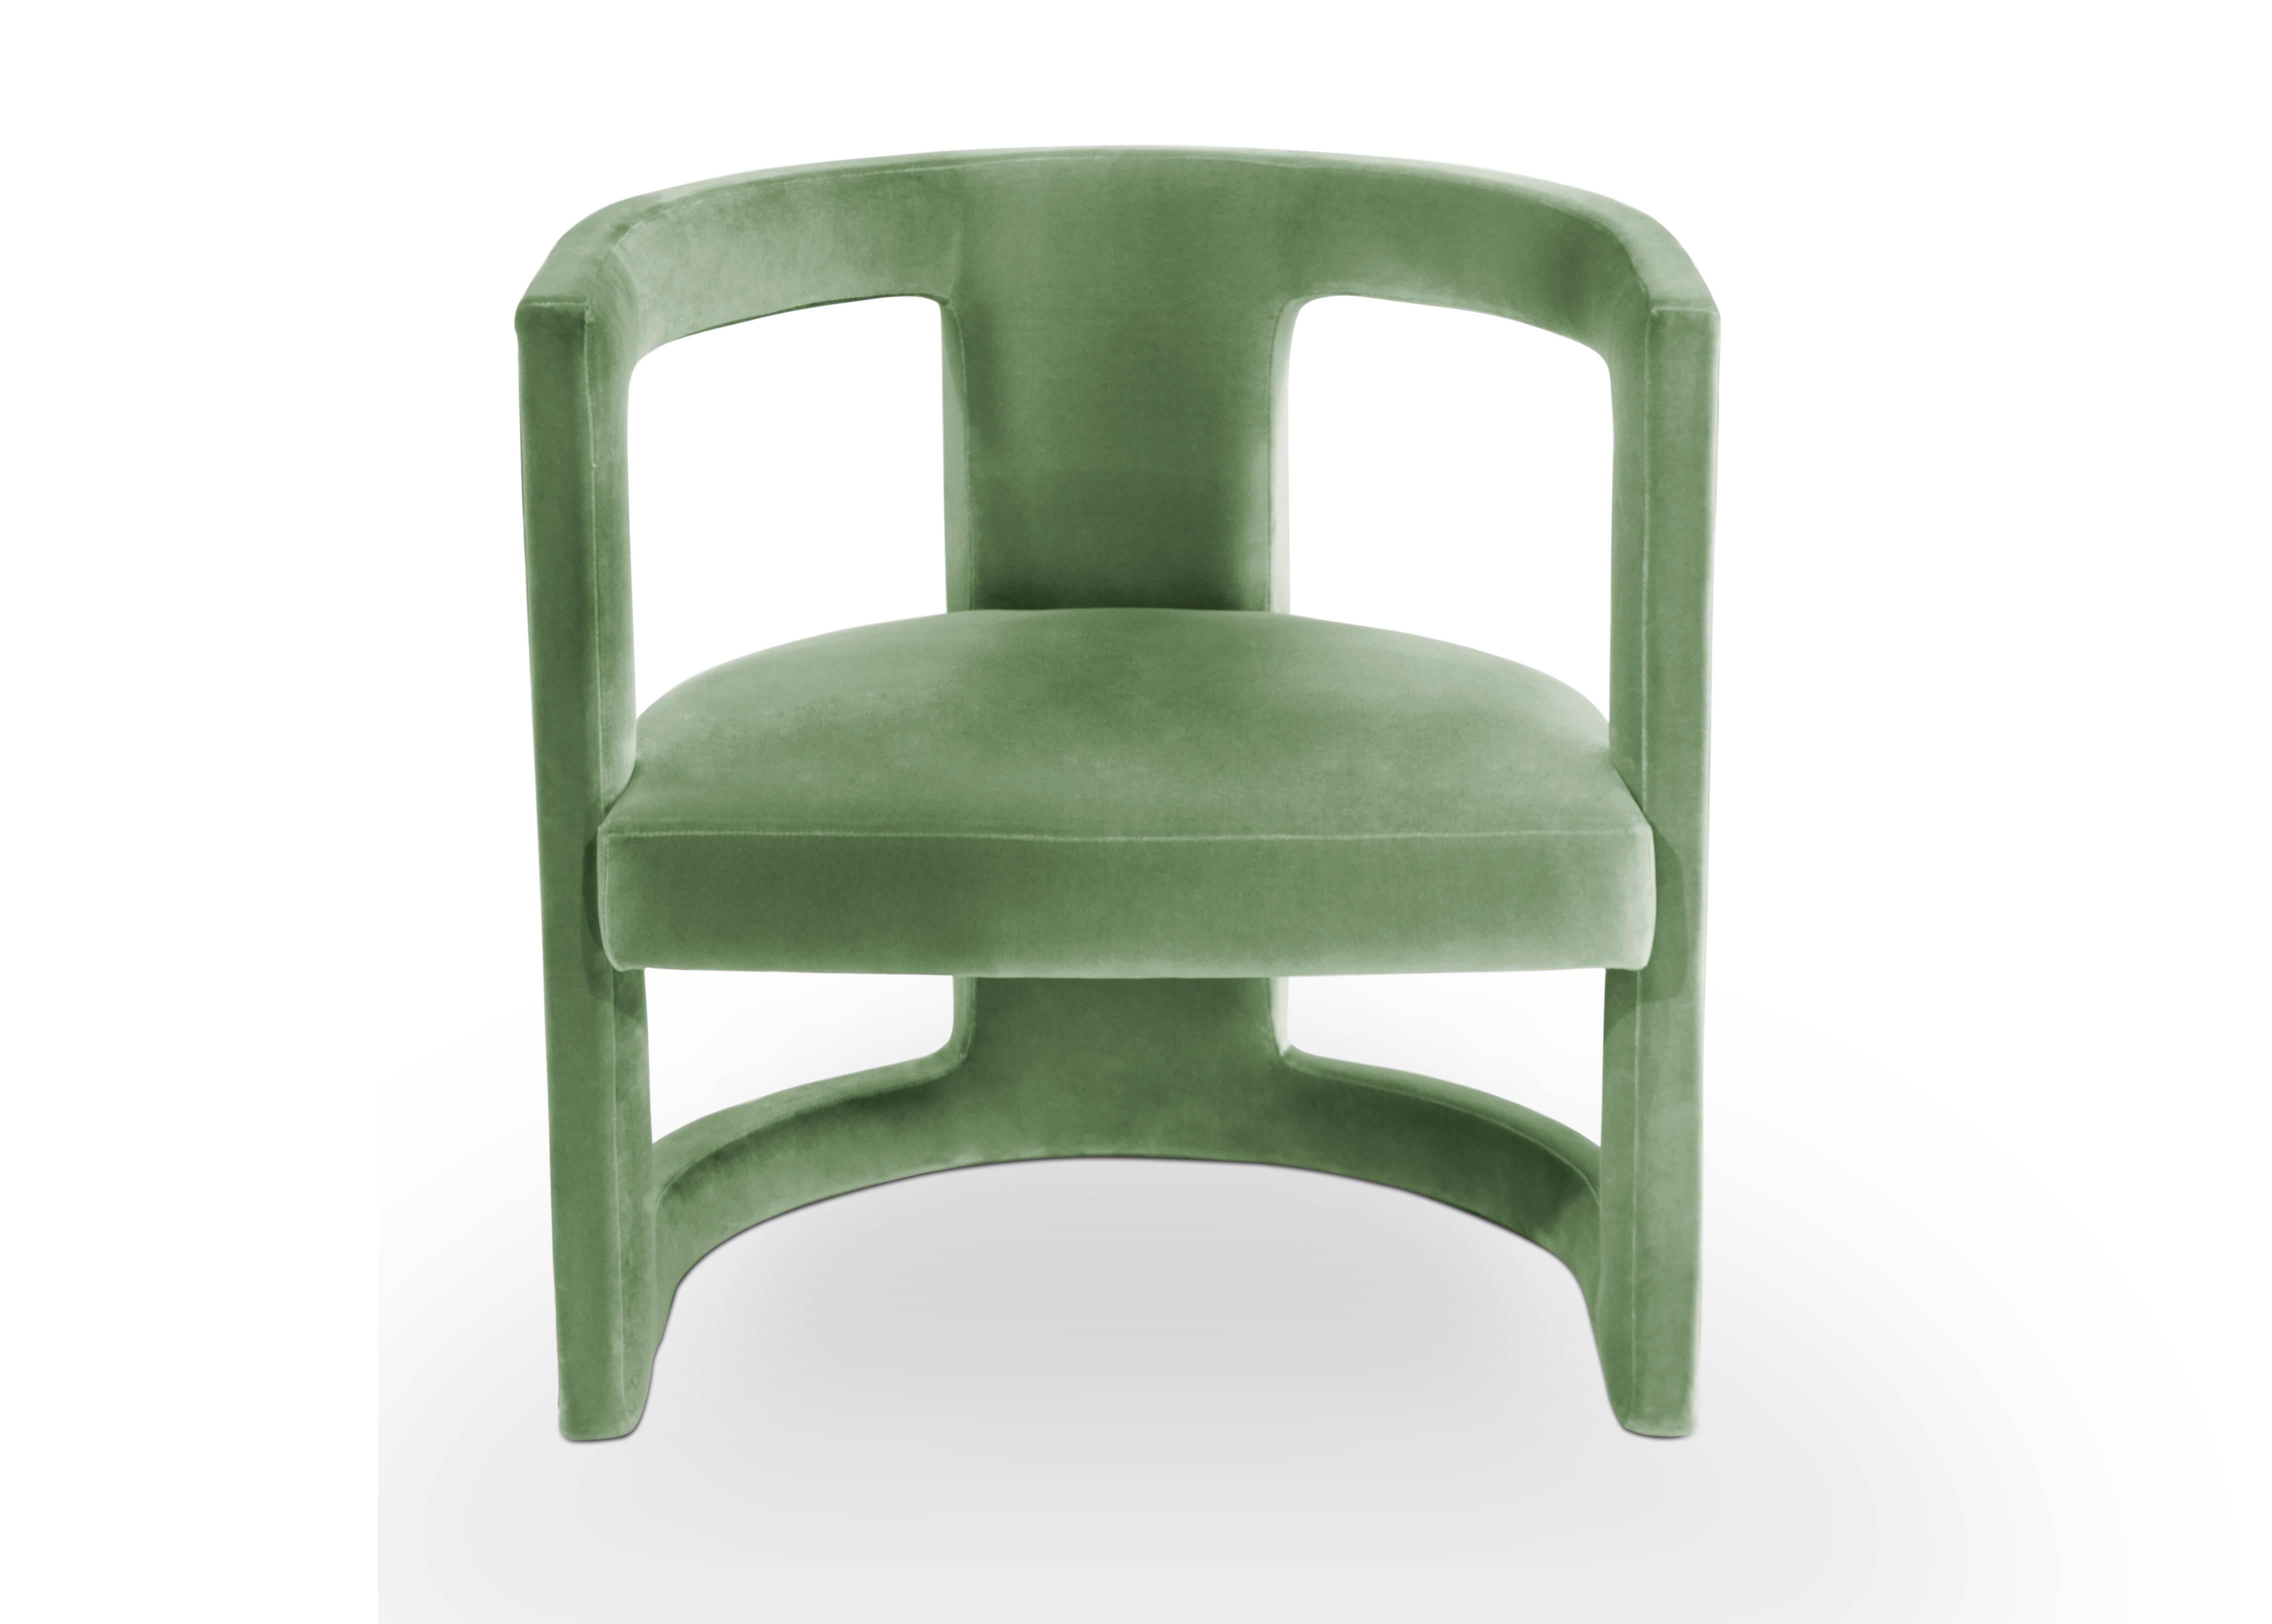 Pair of Modern European Green Cotton Velvet Armchair Tub Lounge Cocktail Chairs In Excellent Condition For Sale In Sydney, NSW